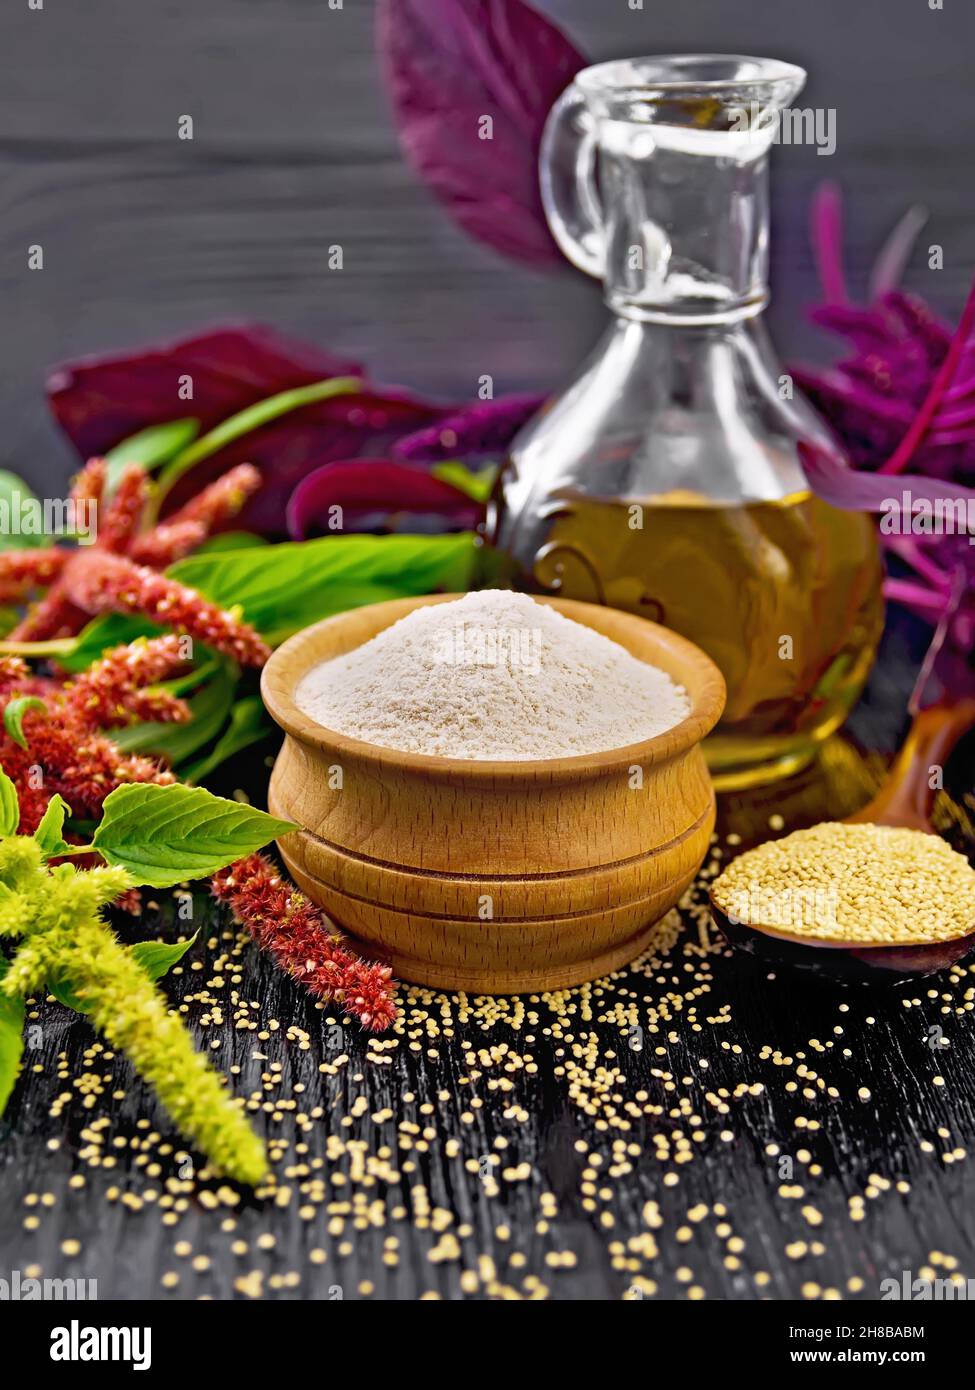 Amaranth flour in a bowl, seeds in a spoon and oil in decanter, leaves and brown, green, purple flowers of plant on wooden board background Stock Photo